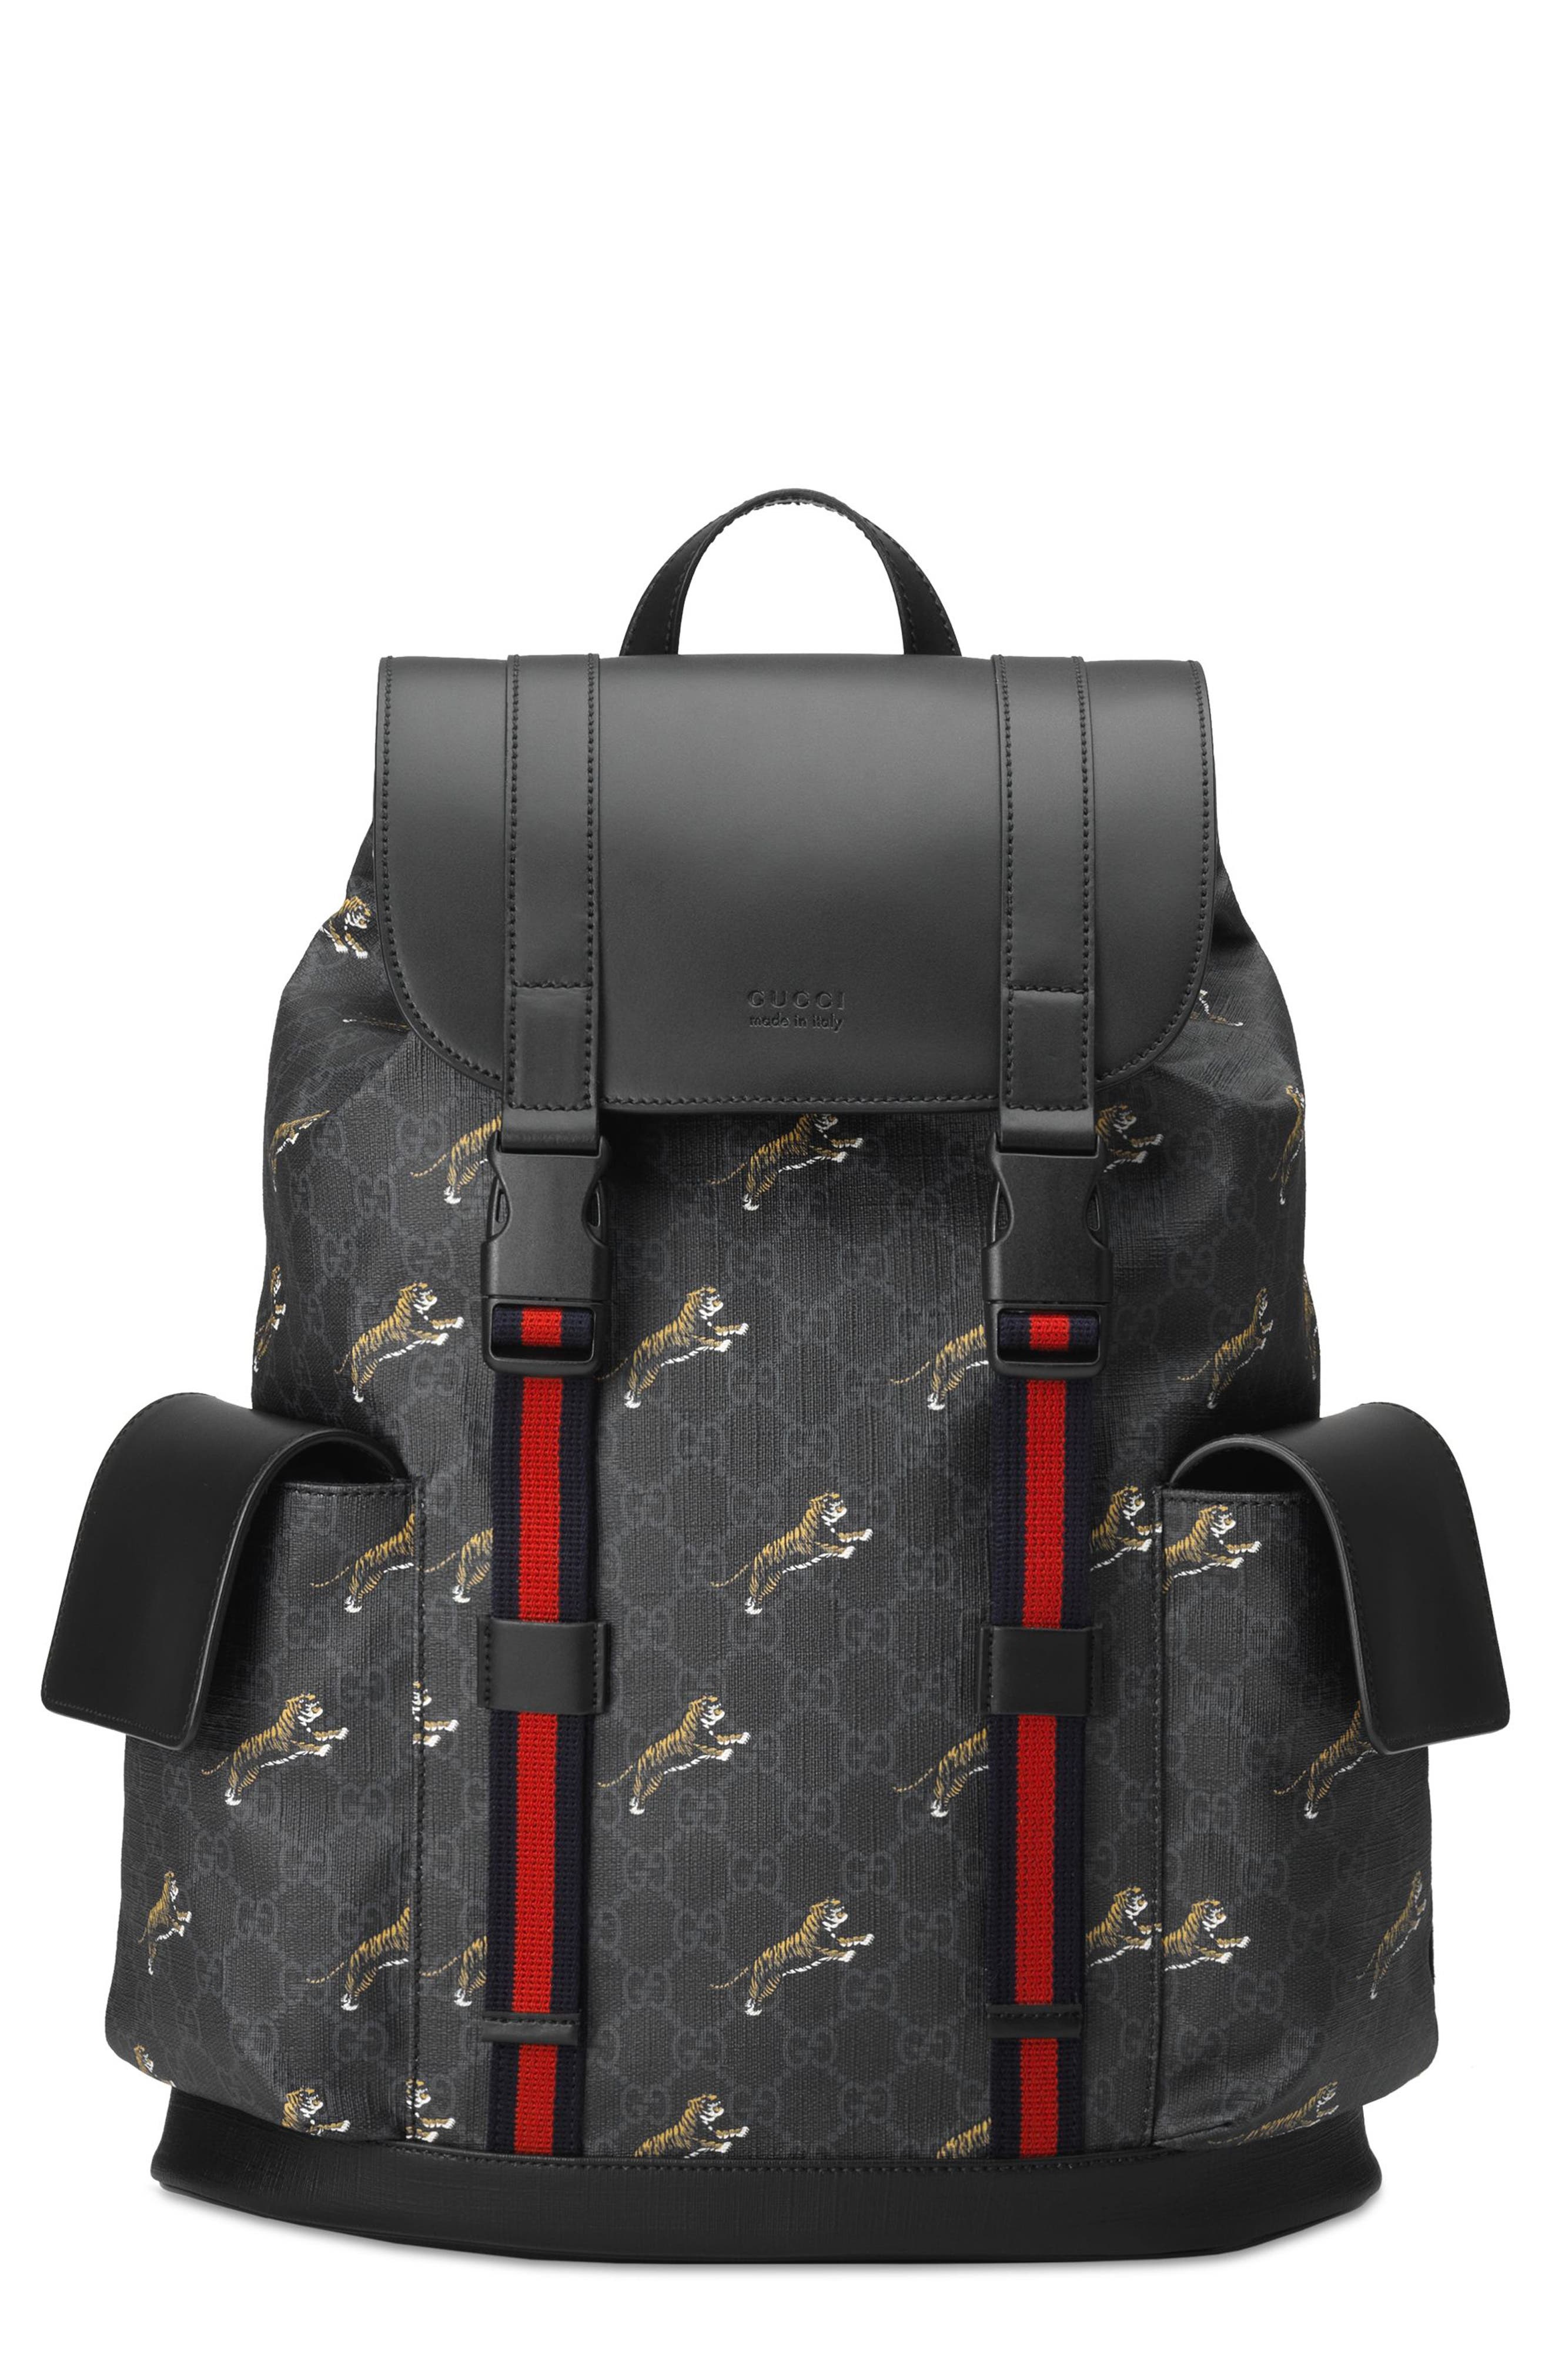 Gucci GG Supreme Tigers Canvas Backpack 